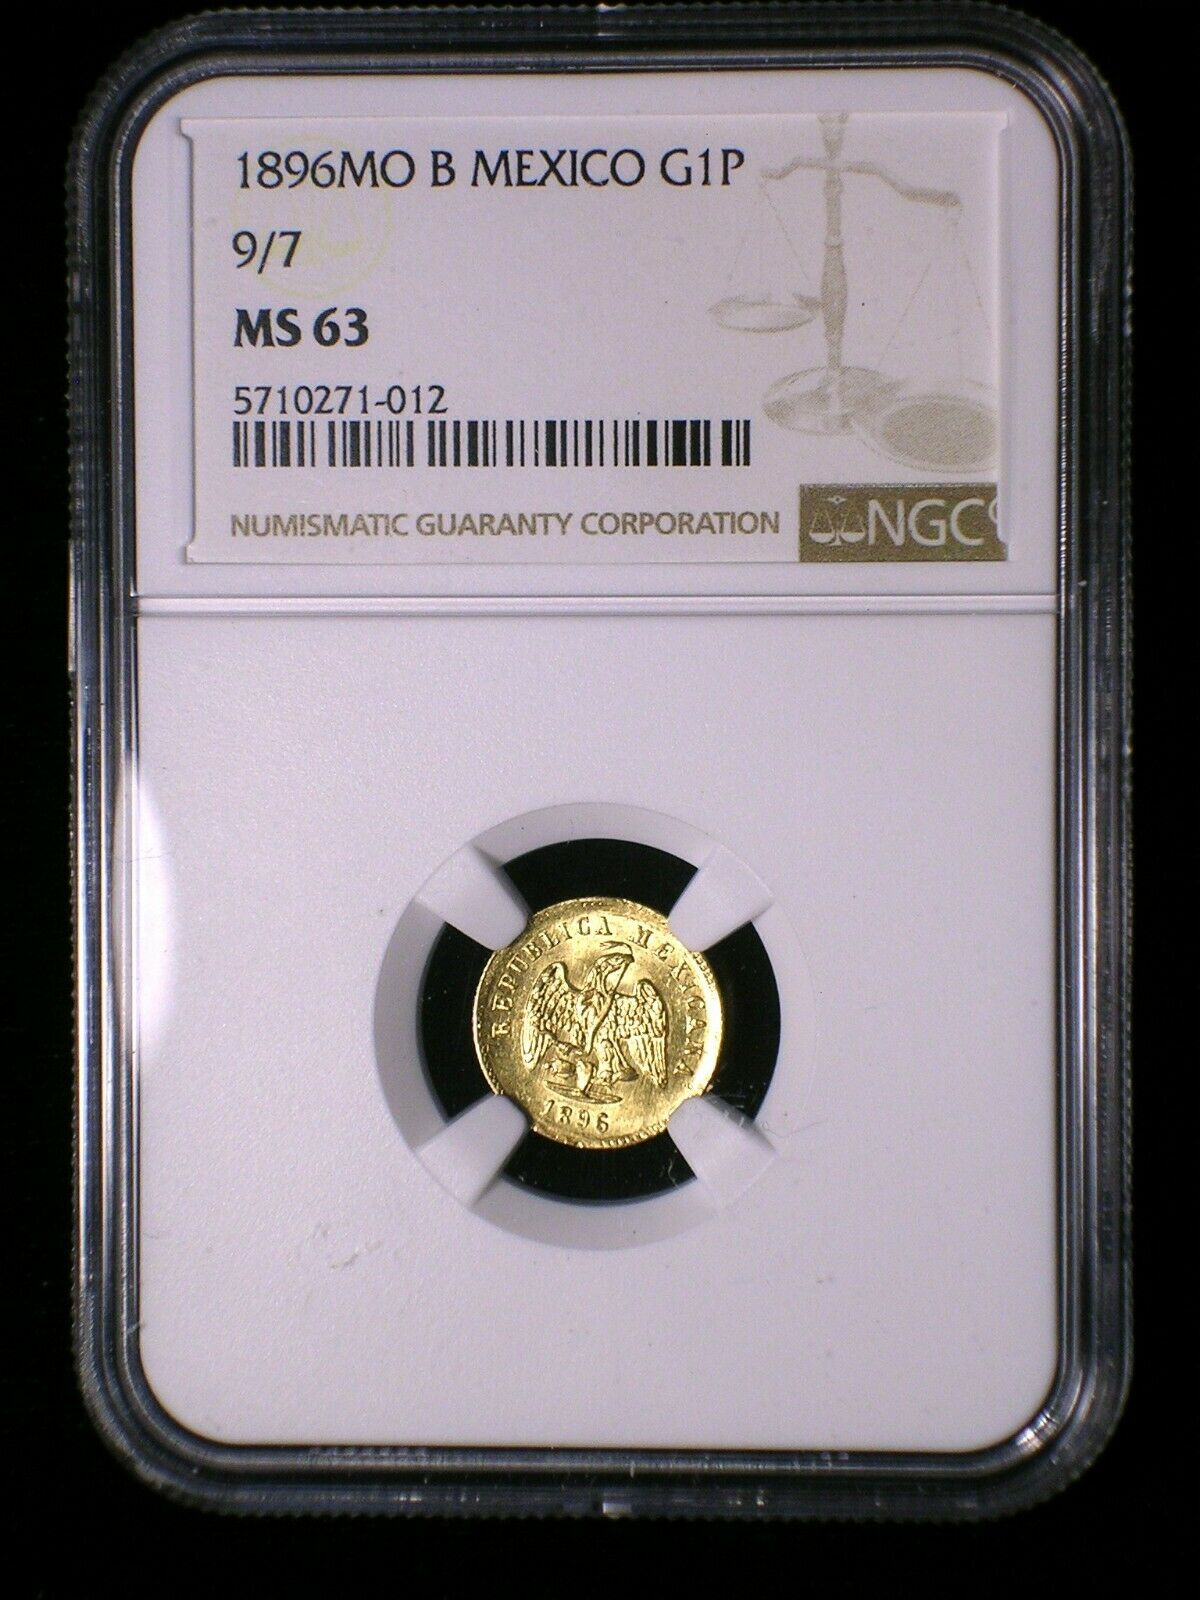 Mexico 2nd Republic 1896 9/7 Gold Peso *ngc Ms-63* Rare Overdate Only 2 Known